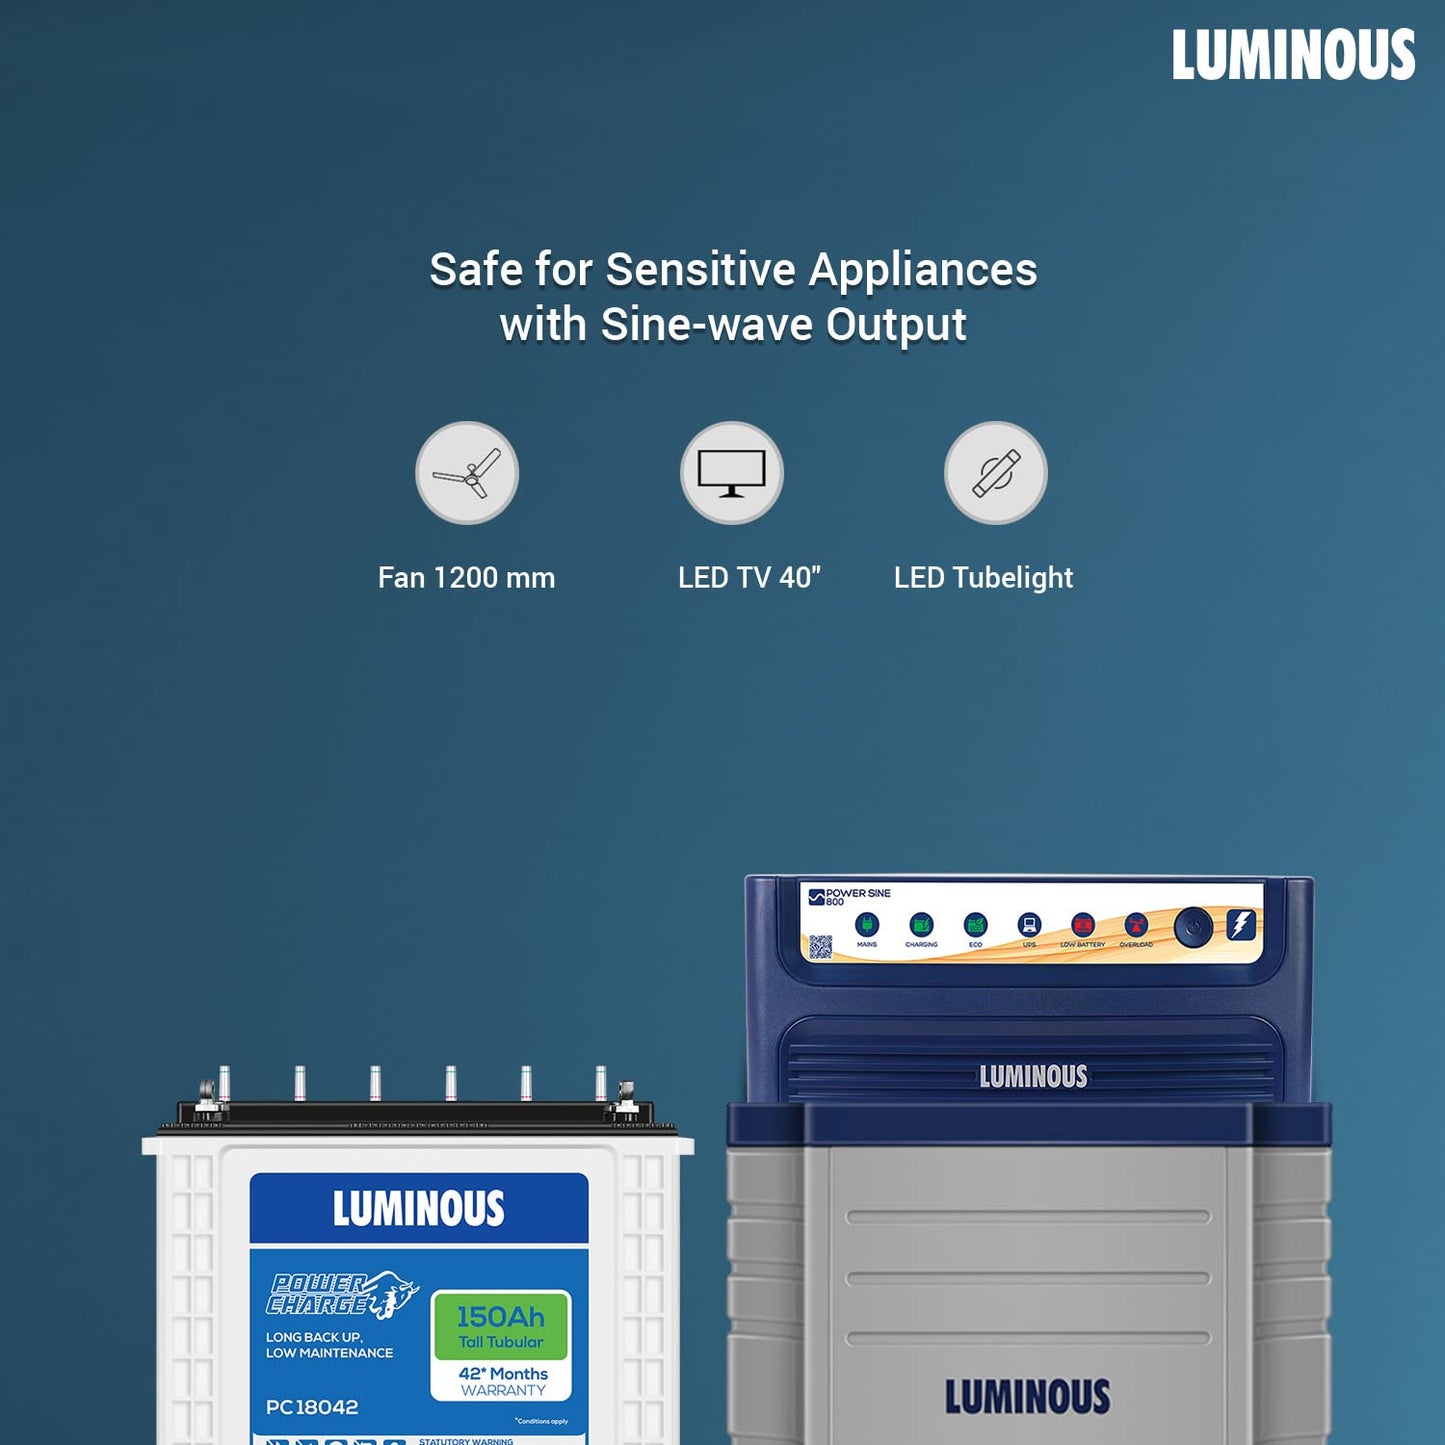 Luminous Power Sine 800 with 700VA Inverter Power Charge PC18042 Battery 150Ah  and Trolley for 1BHK